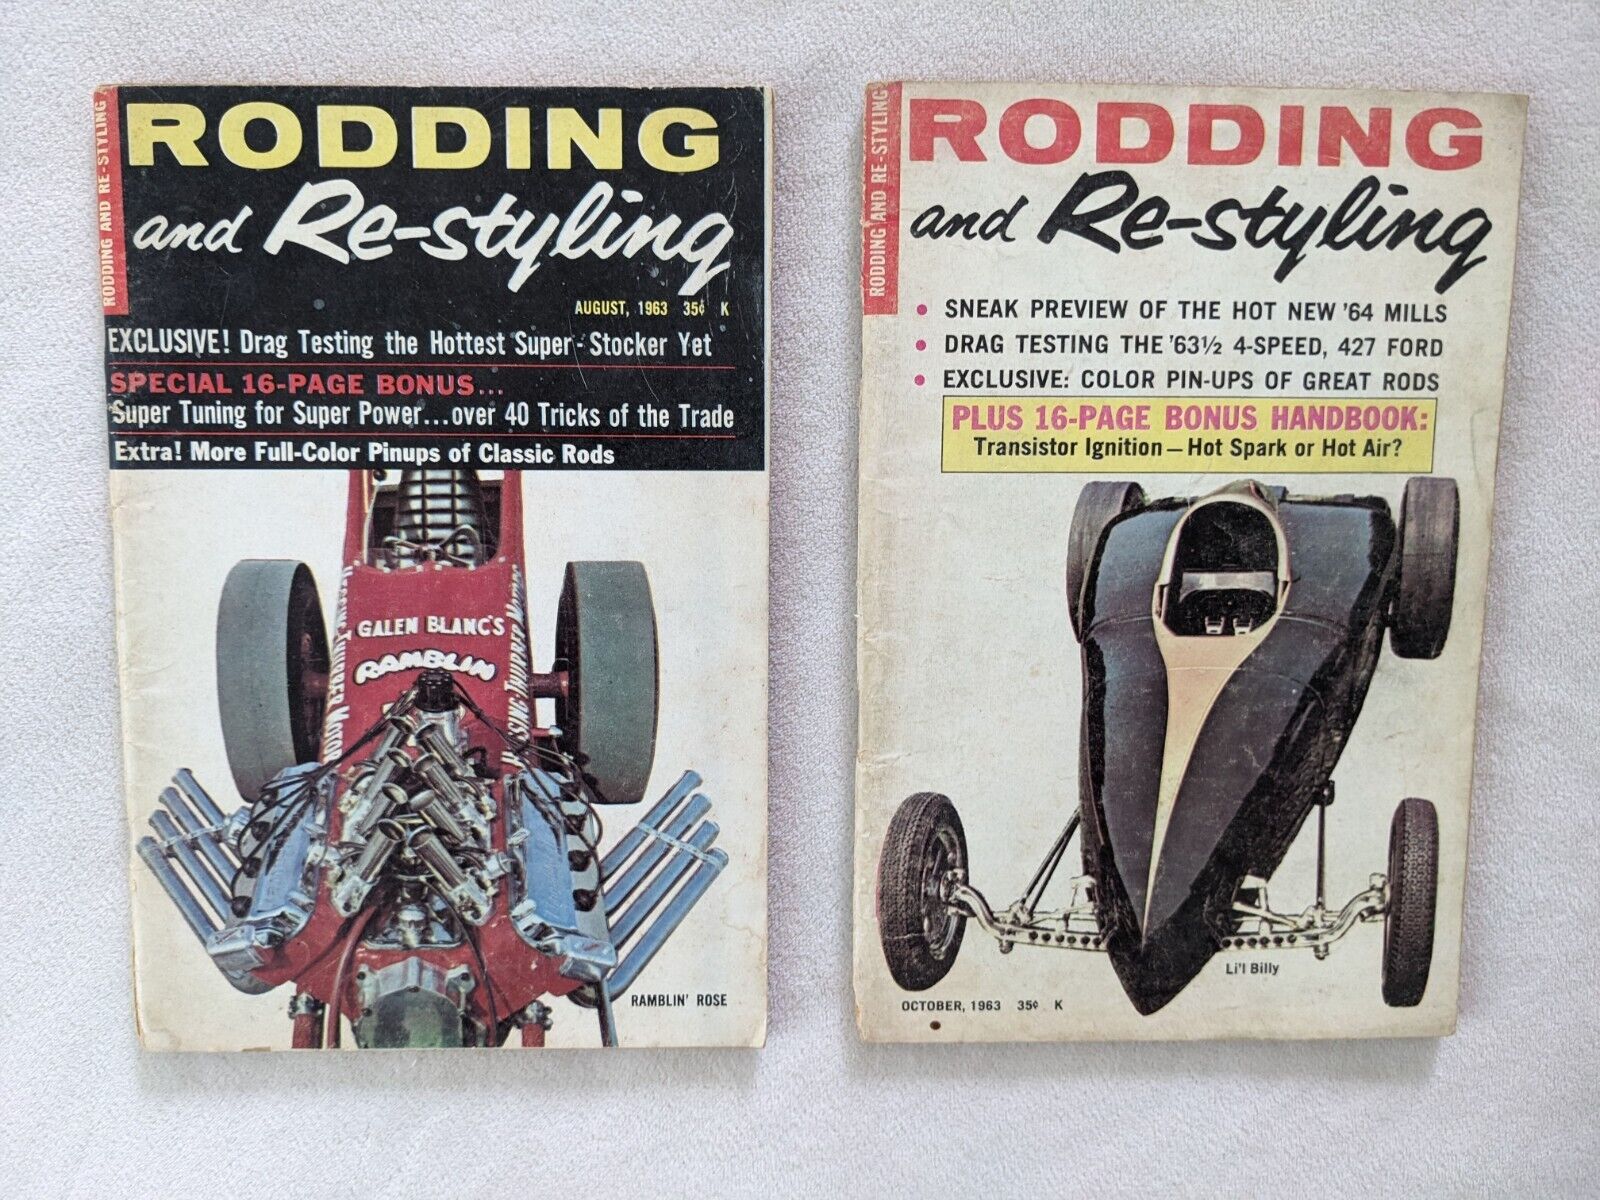 Lot of 2 Rodding and Restyling Magazines - Jul/Aug and Sept/Oct 1963 - Vintage